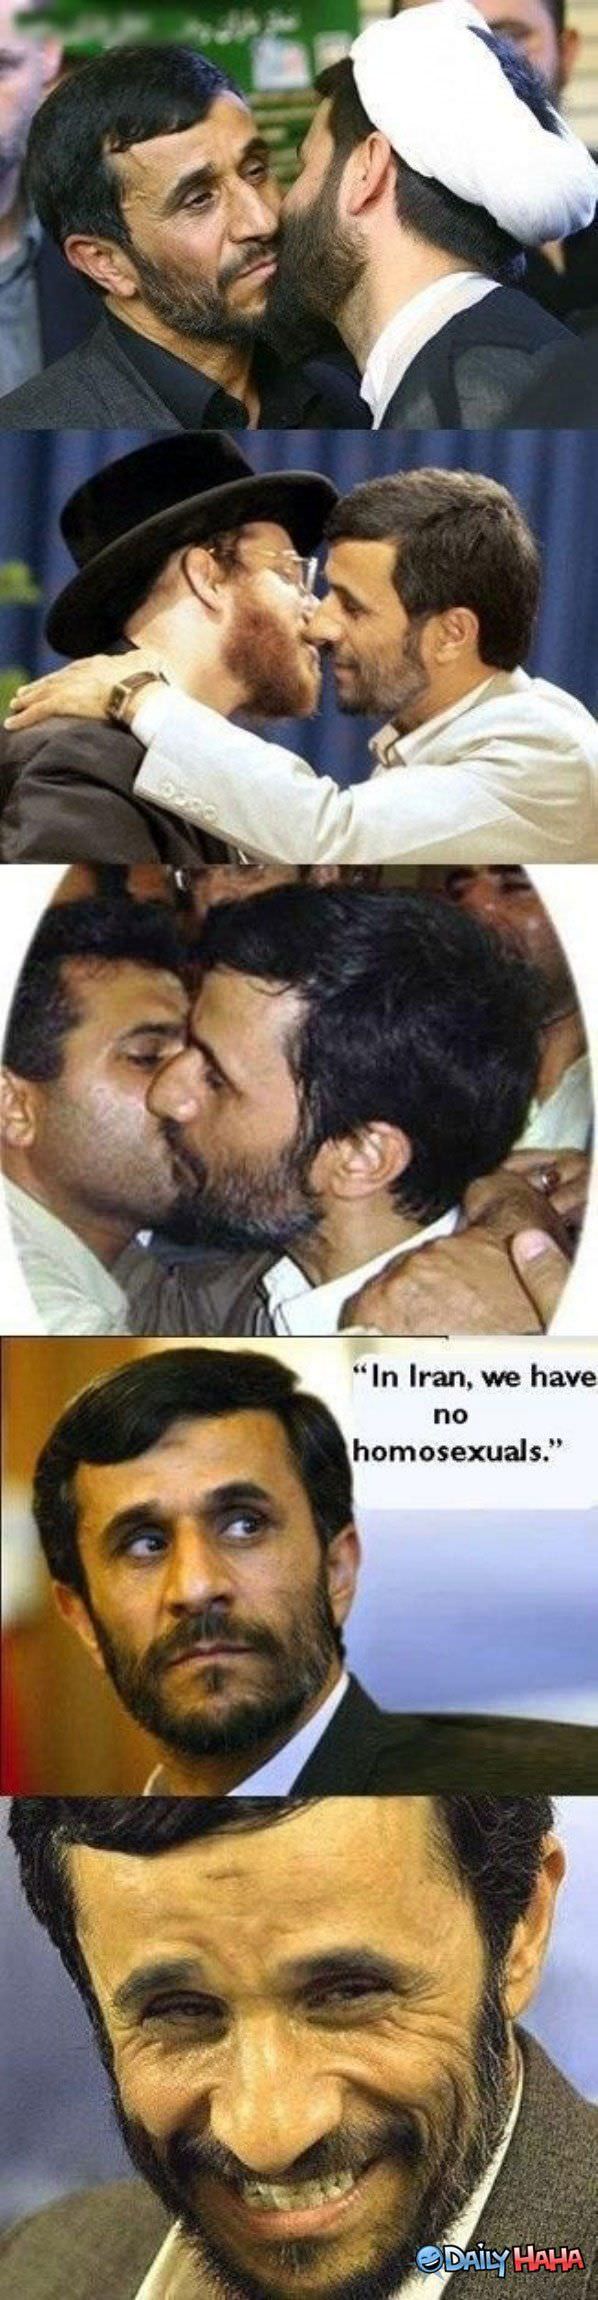 Not in Iran funny picture